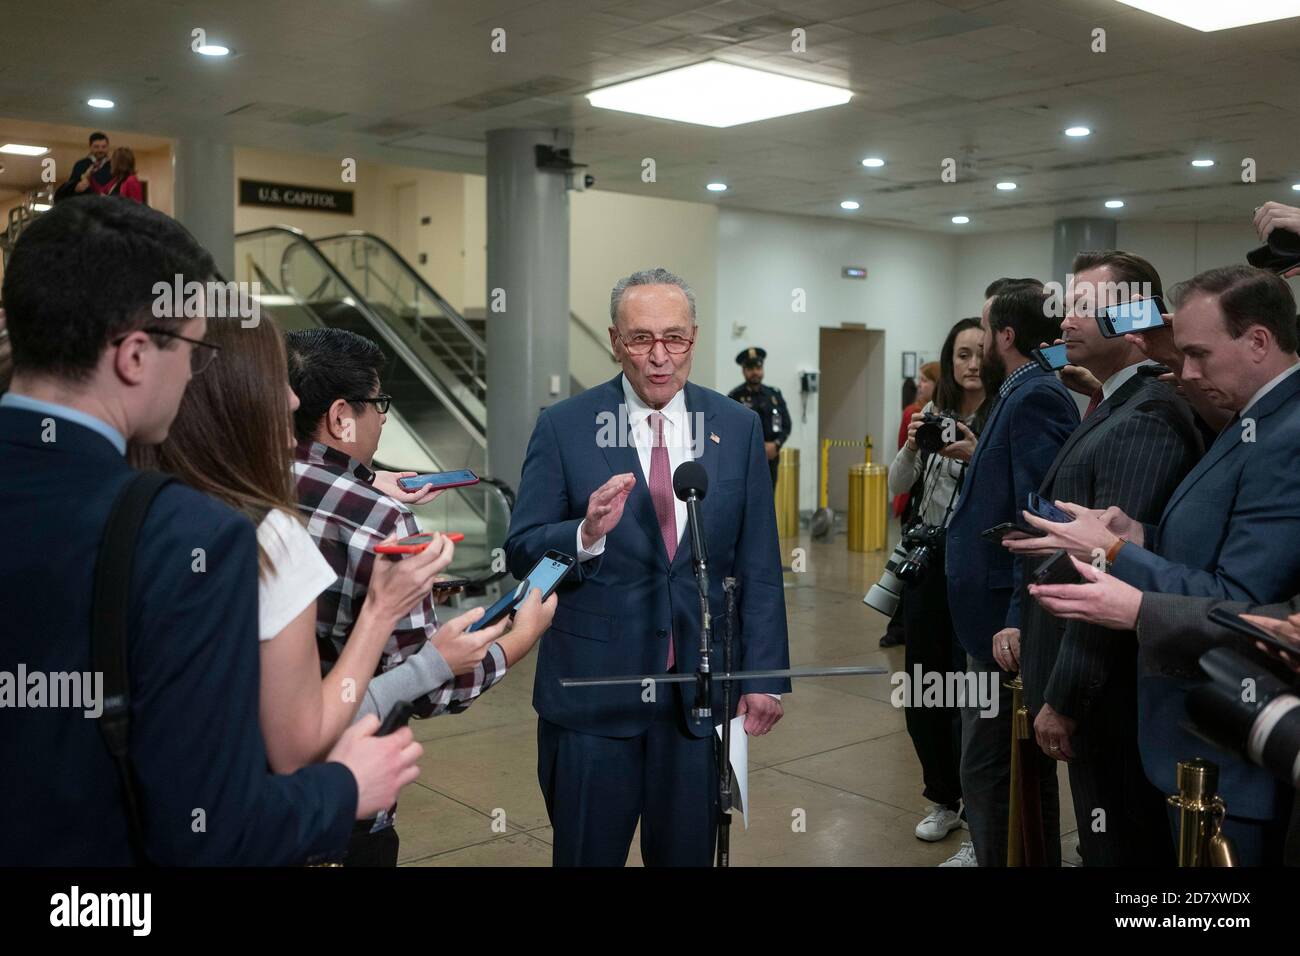 Minority Leader Chuck Schumer, a Democrat from New York, speaks to members of the media during a news conference at the U.S. Capitol in Washington, D.C., U.S., on Friday, Jan. 31, 2020. Credit: Alex Edelman/The Photo Access Stock Photo